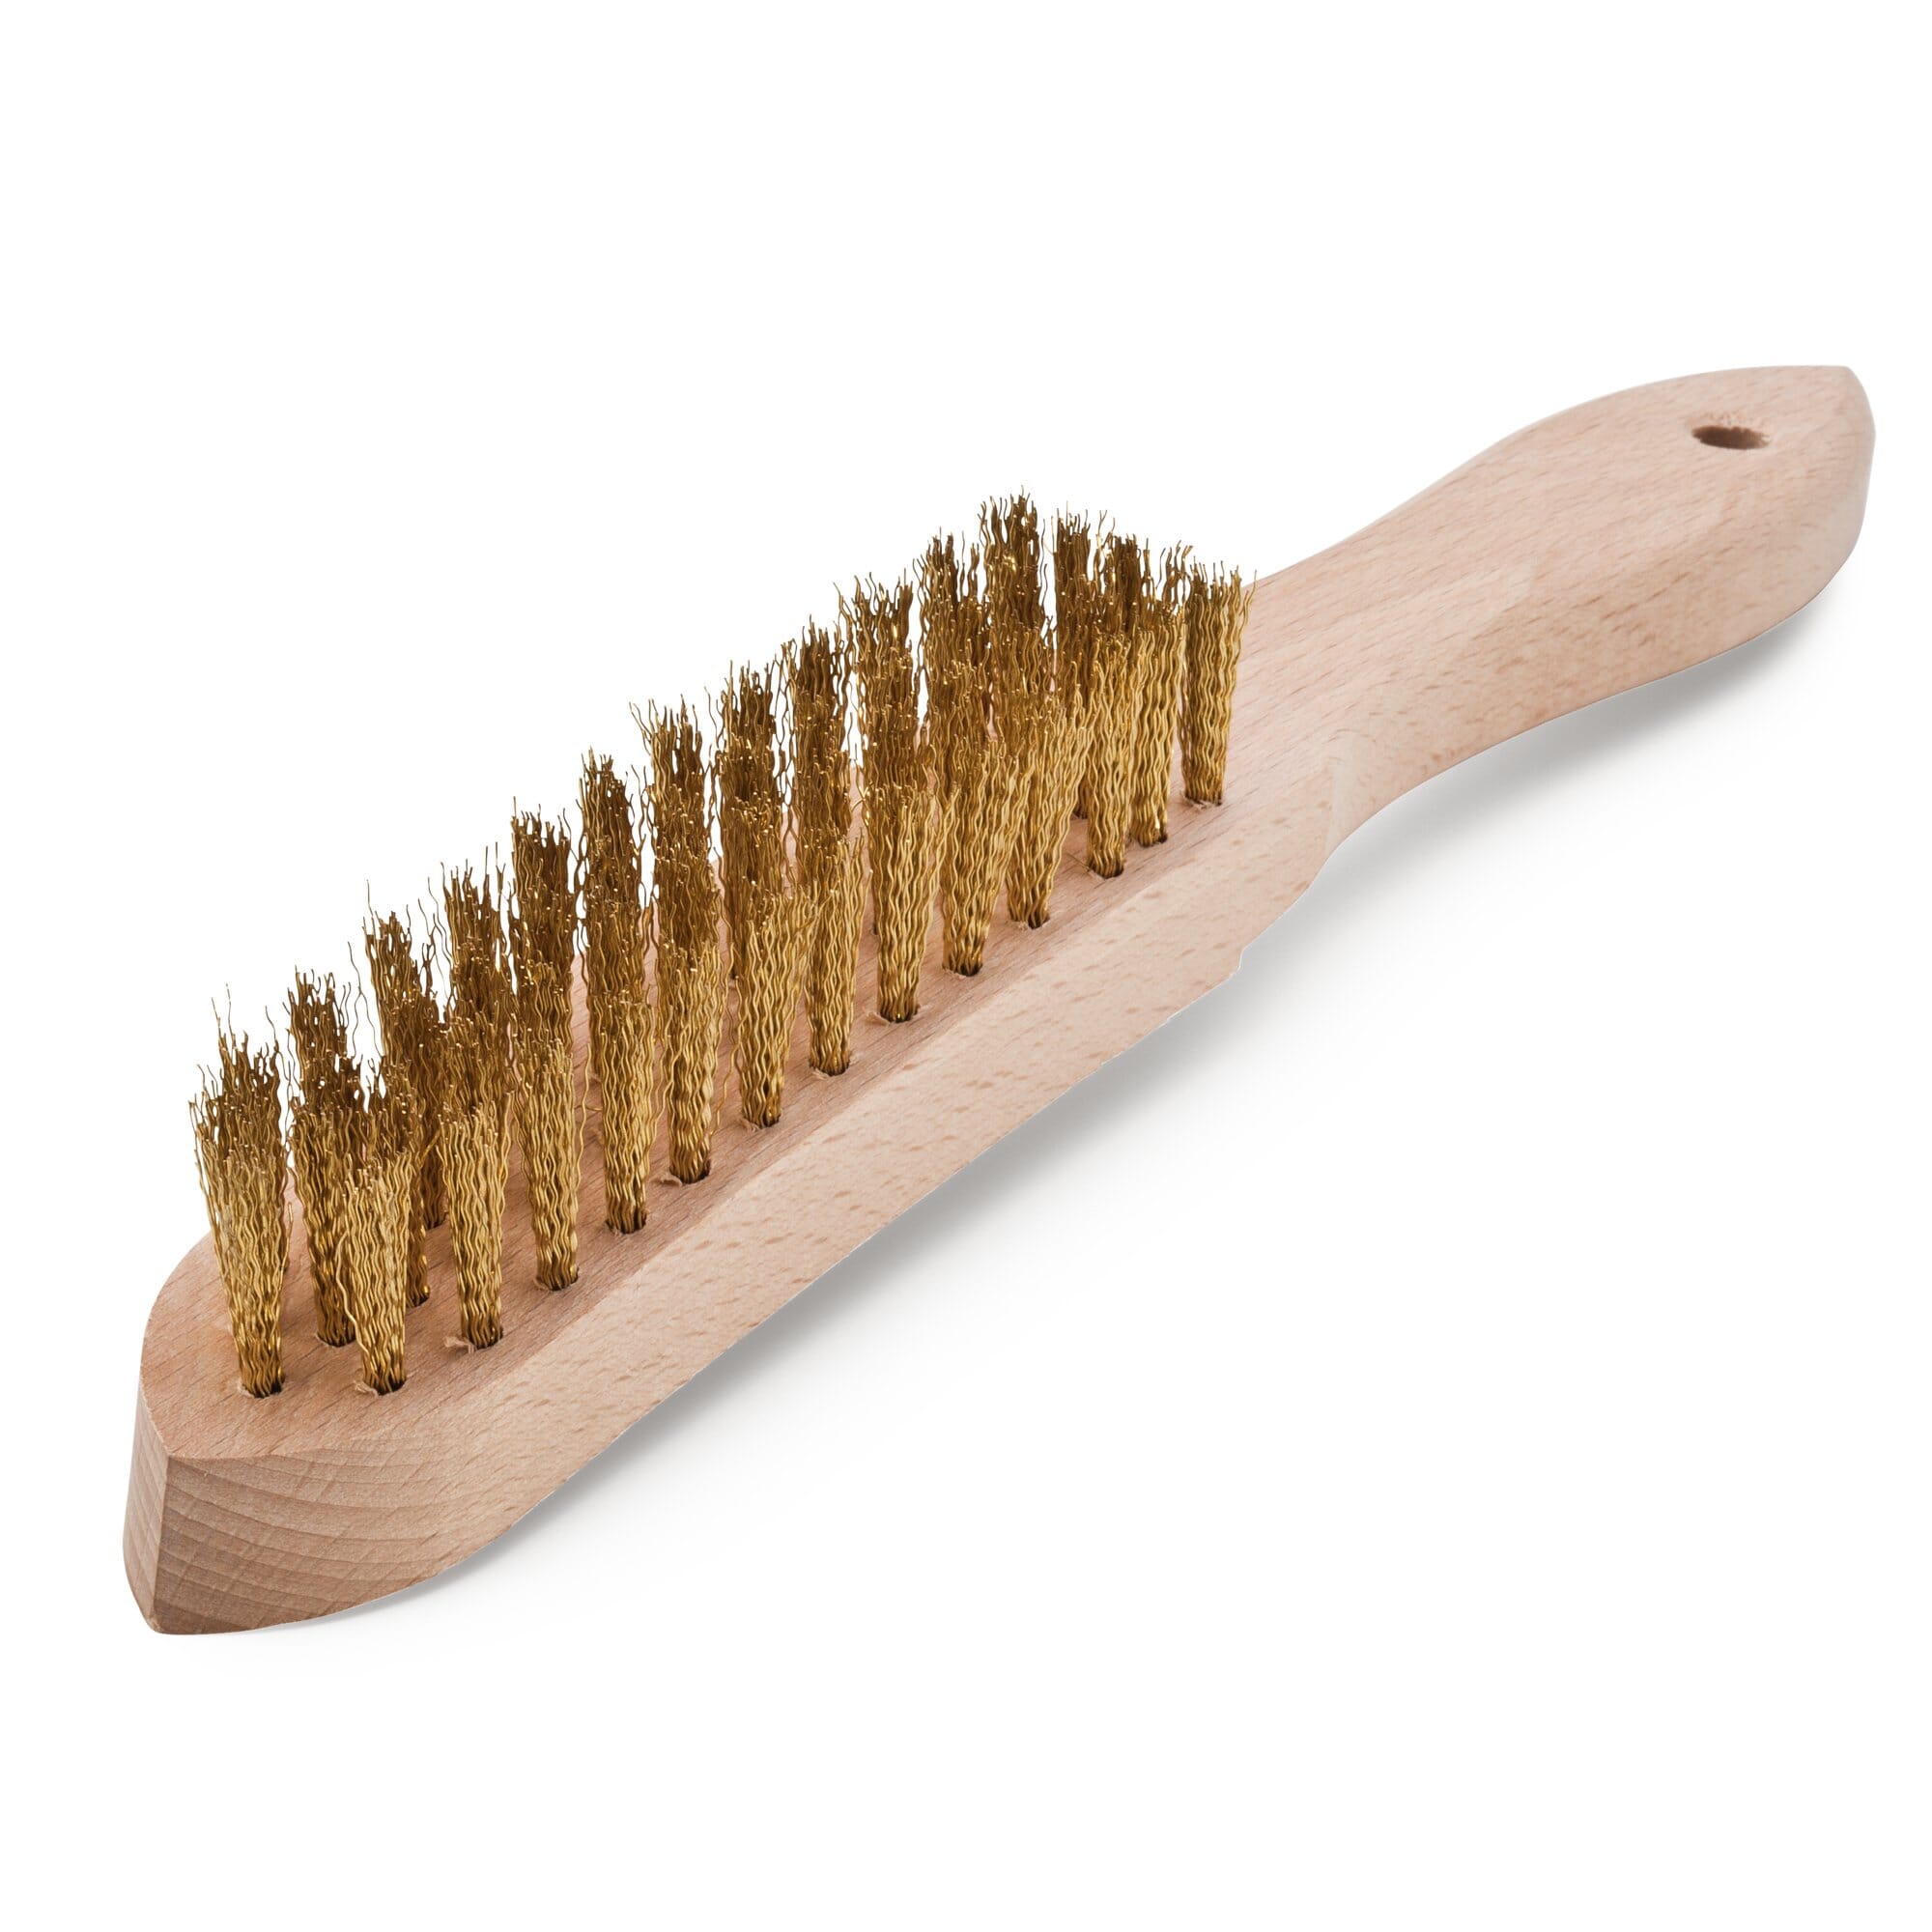 Brass wire brush ∙ 4 rows, Bürsten / Schaber, Impact and releasing tools,  scrapers, Hand tools, product worlds